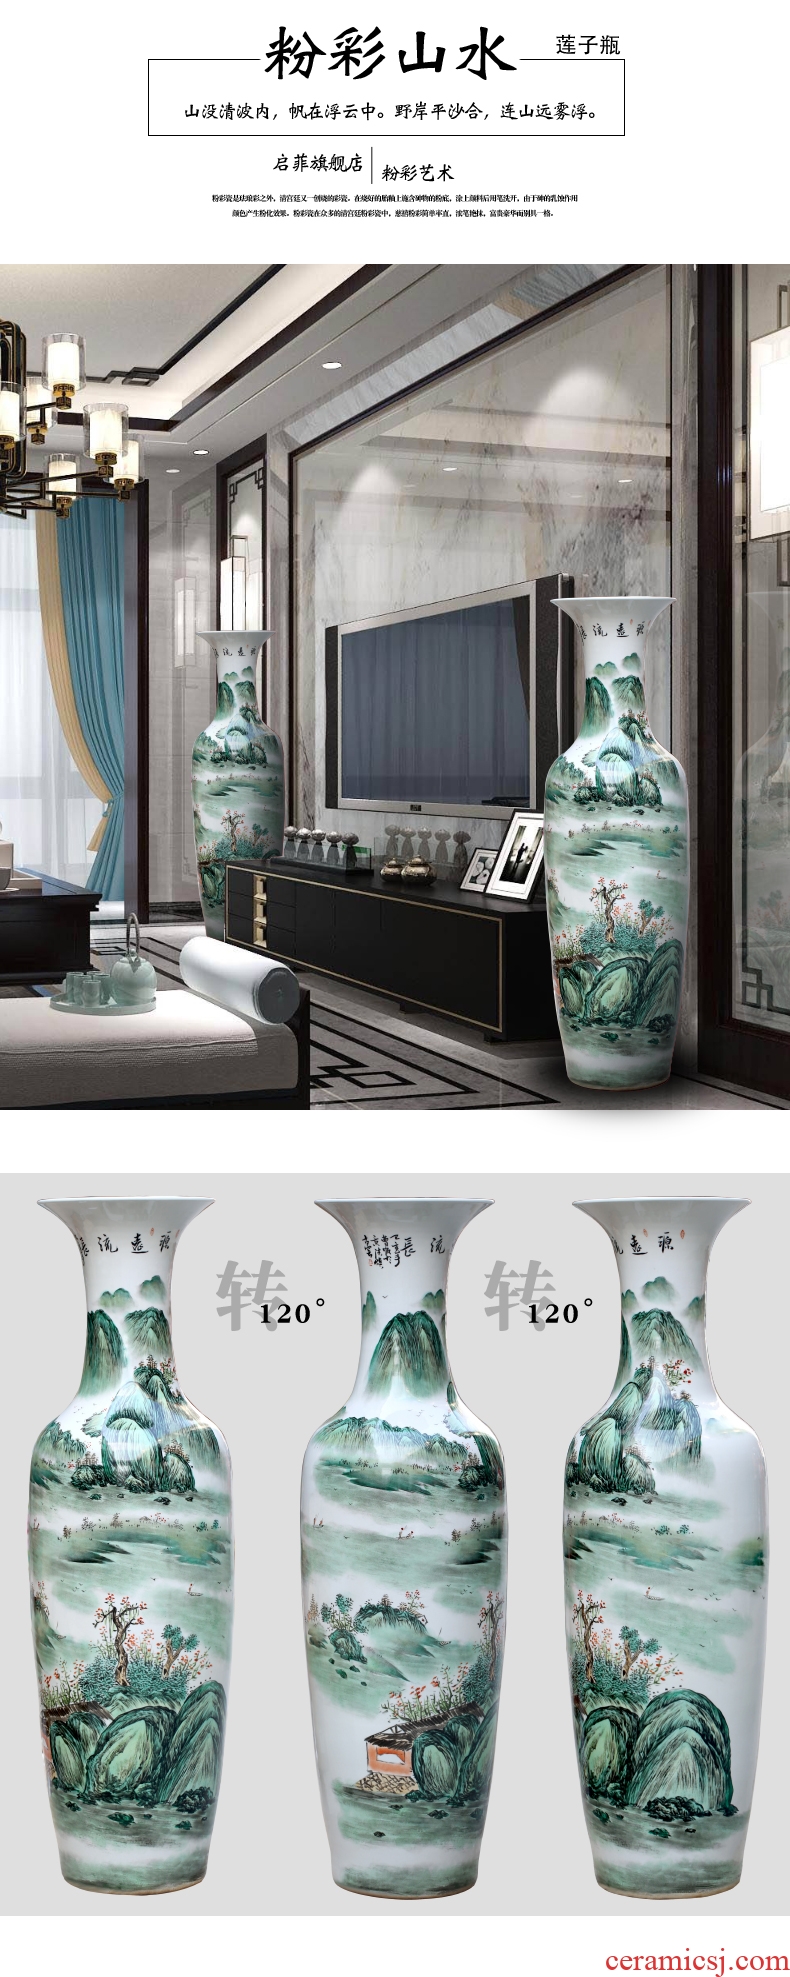 Sitting room of large vase household adornment simulation flower implement contracted and I ou shi dry flower arranging ceramic furnishing articles suit - 588171884832